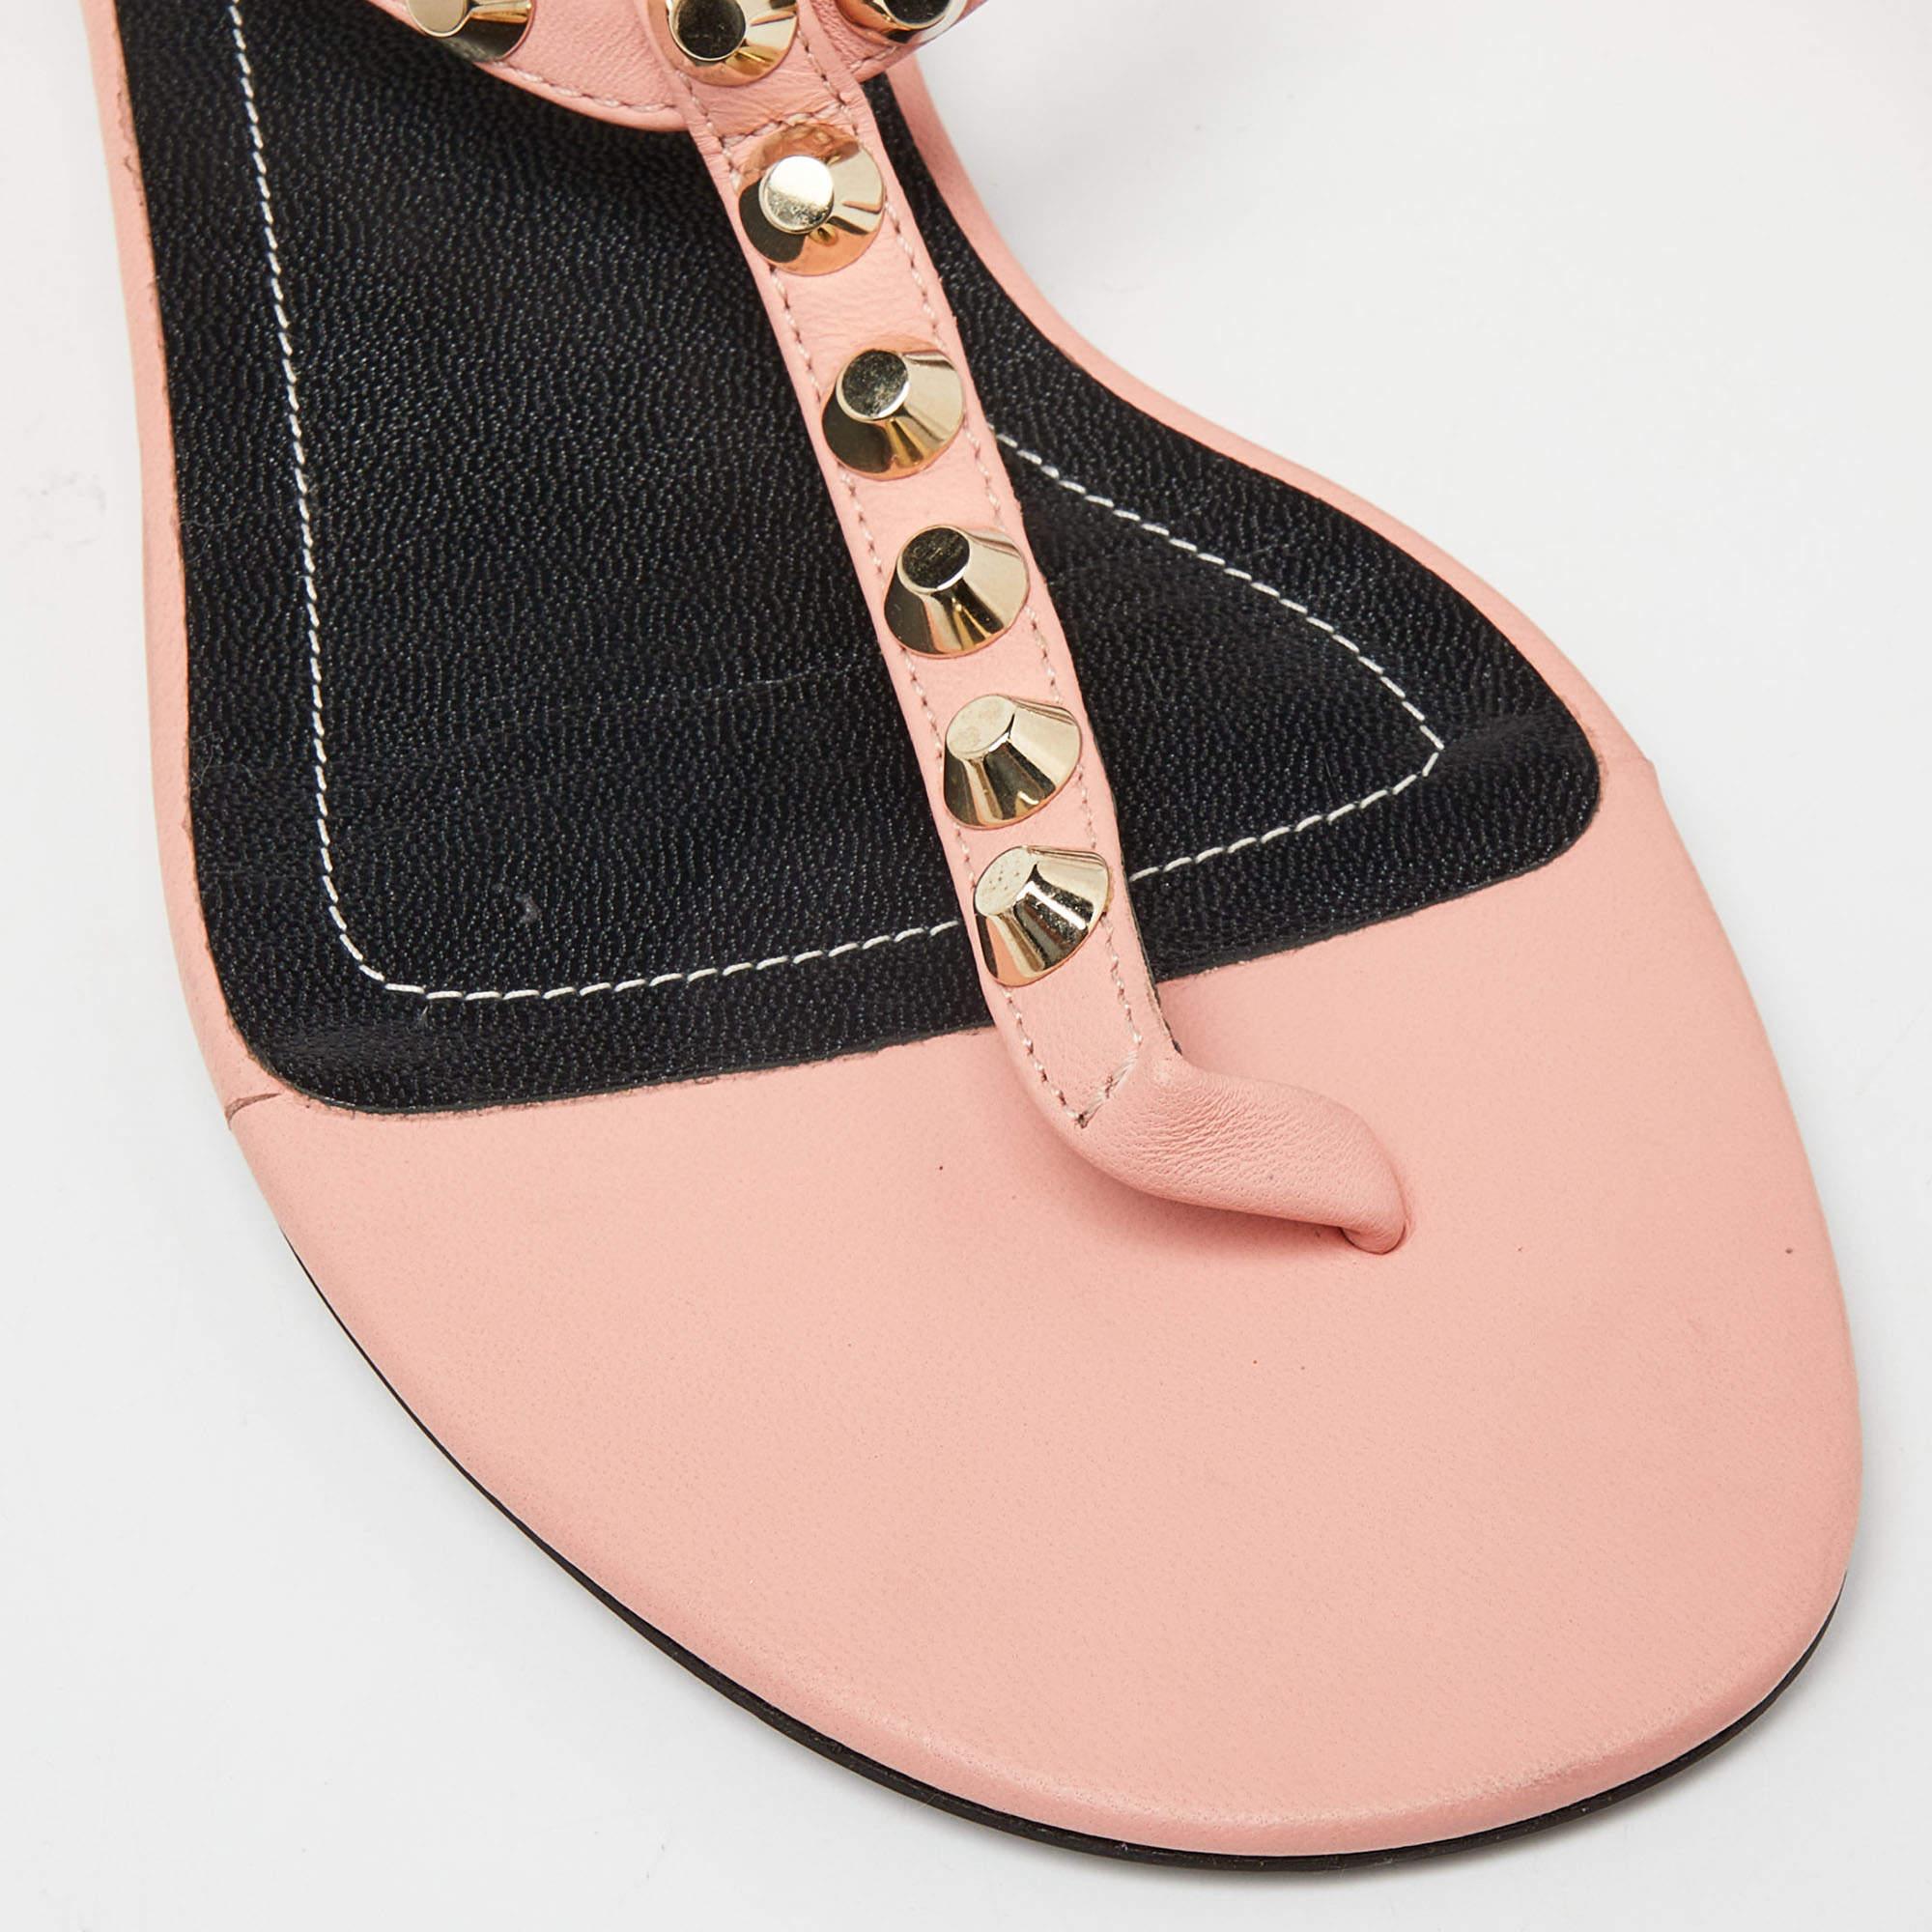 Balenciaga Peach/Black Leather Arena Thong Sandals Size 38 For Sale 3